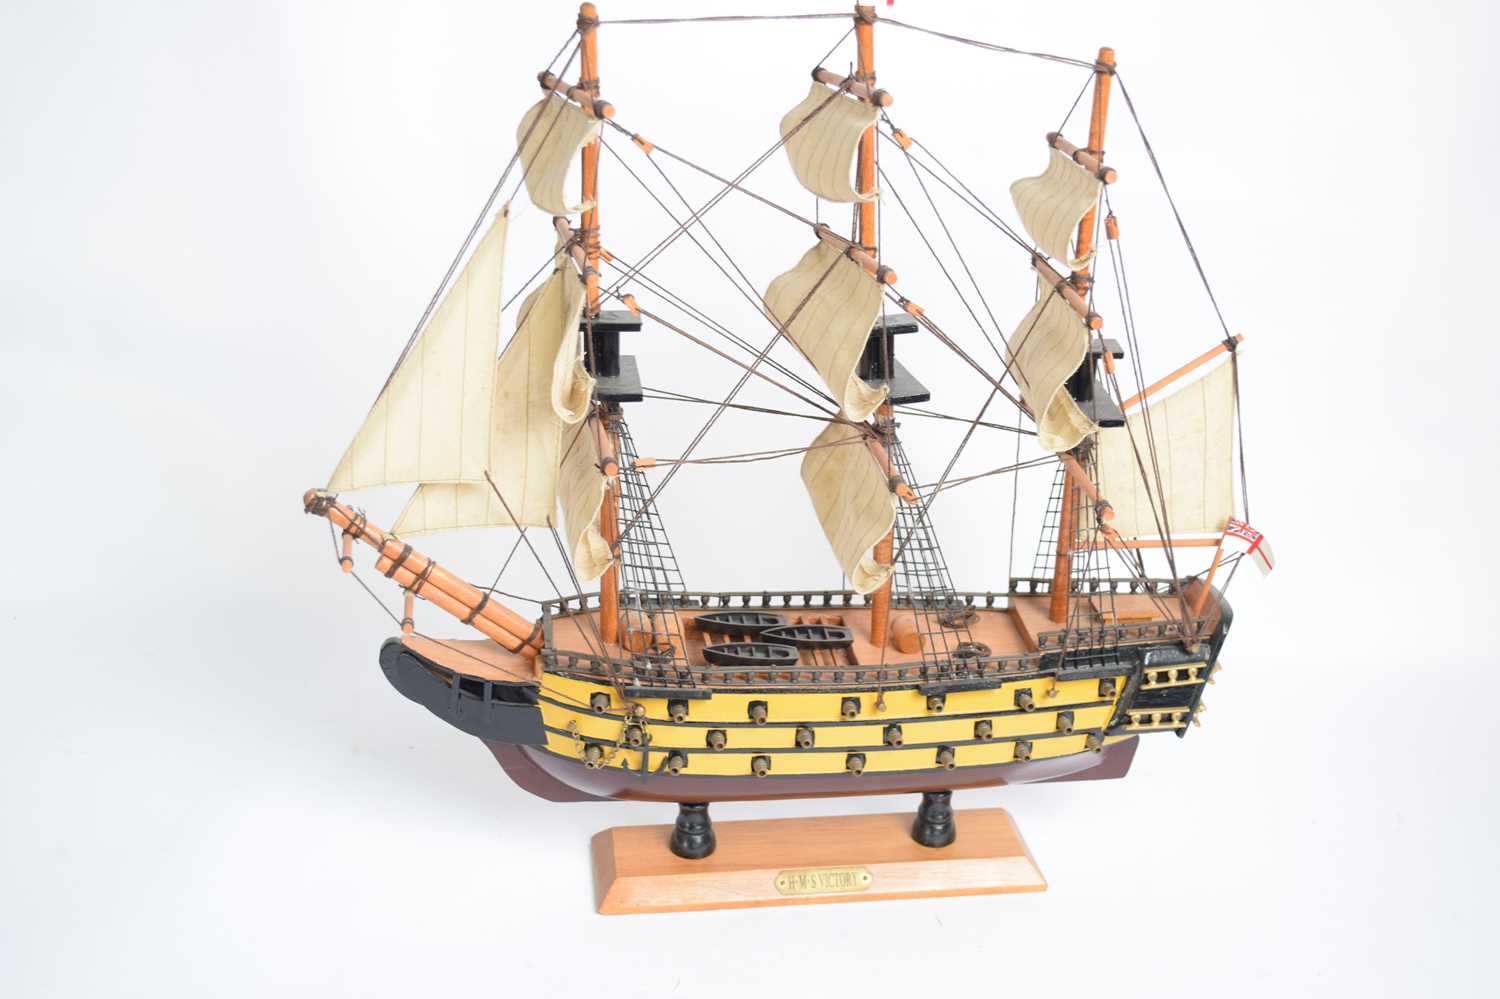 Lot 370 - Contemporary model of HMS Victory, 44cm high